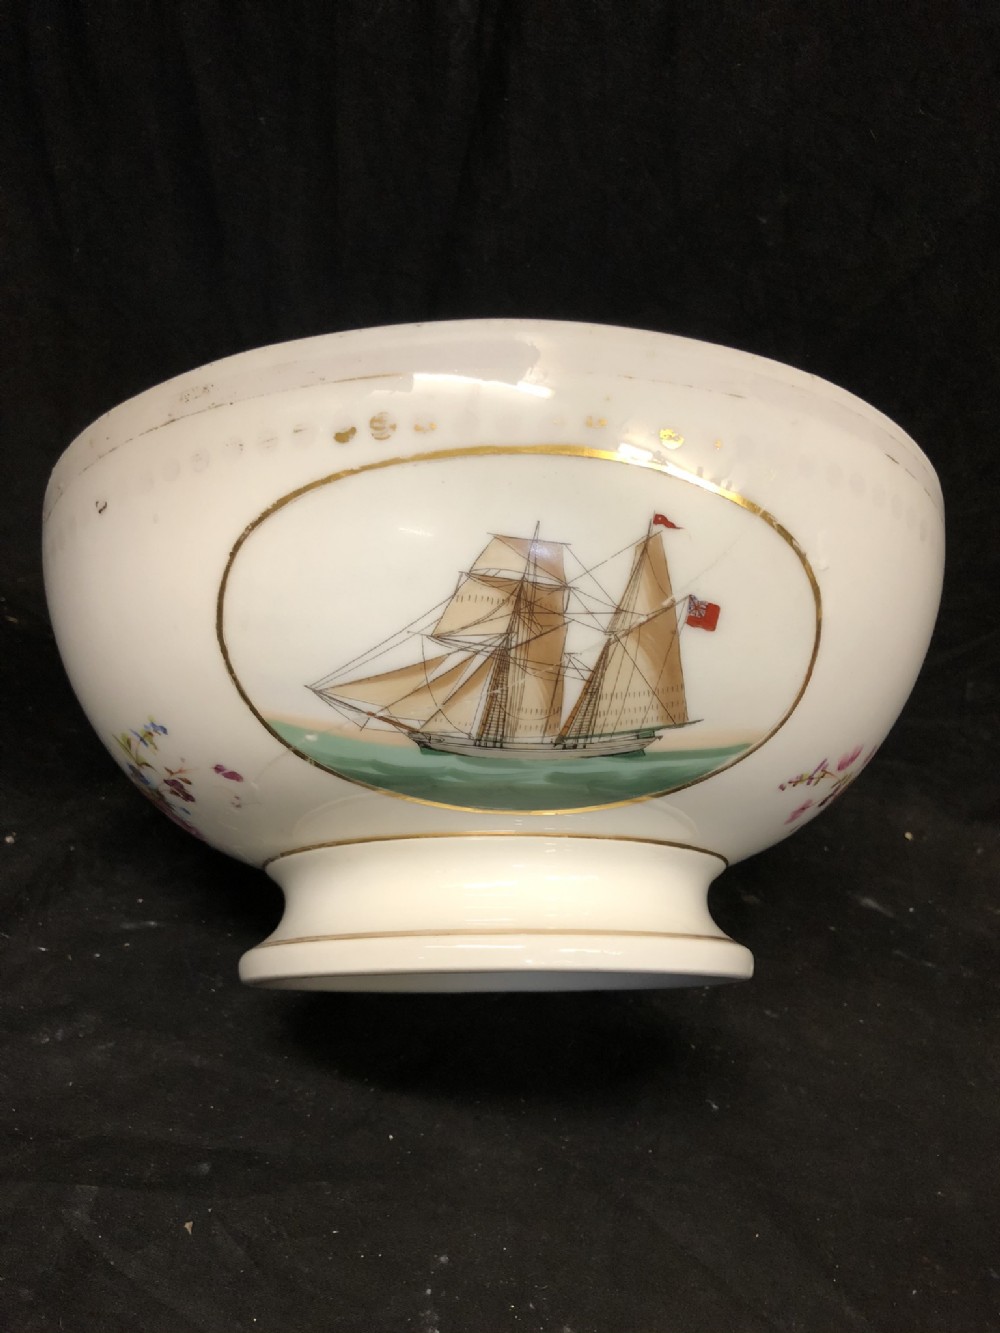 rare early c19th english punchbowl depicting east indiamens in full sail